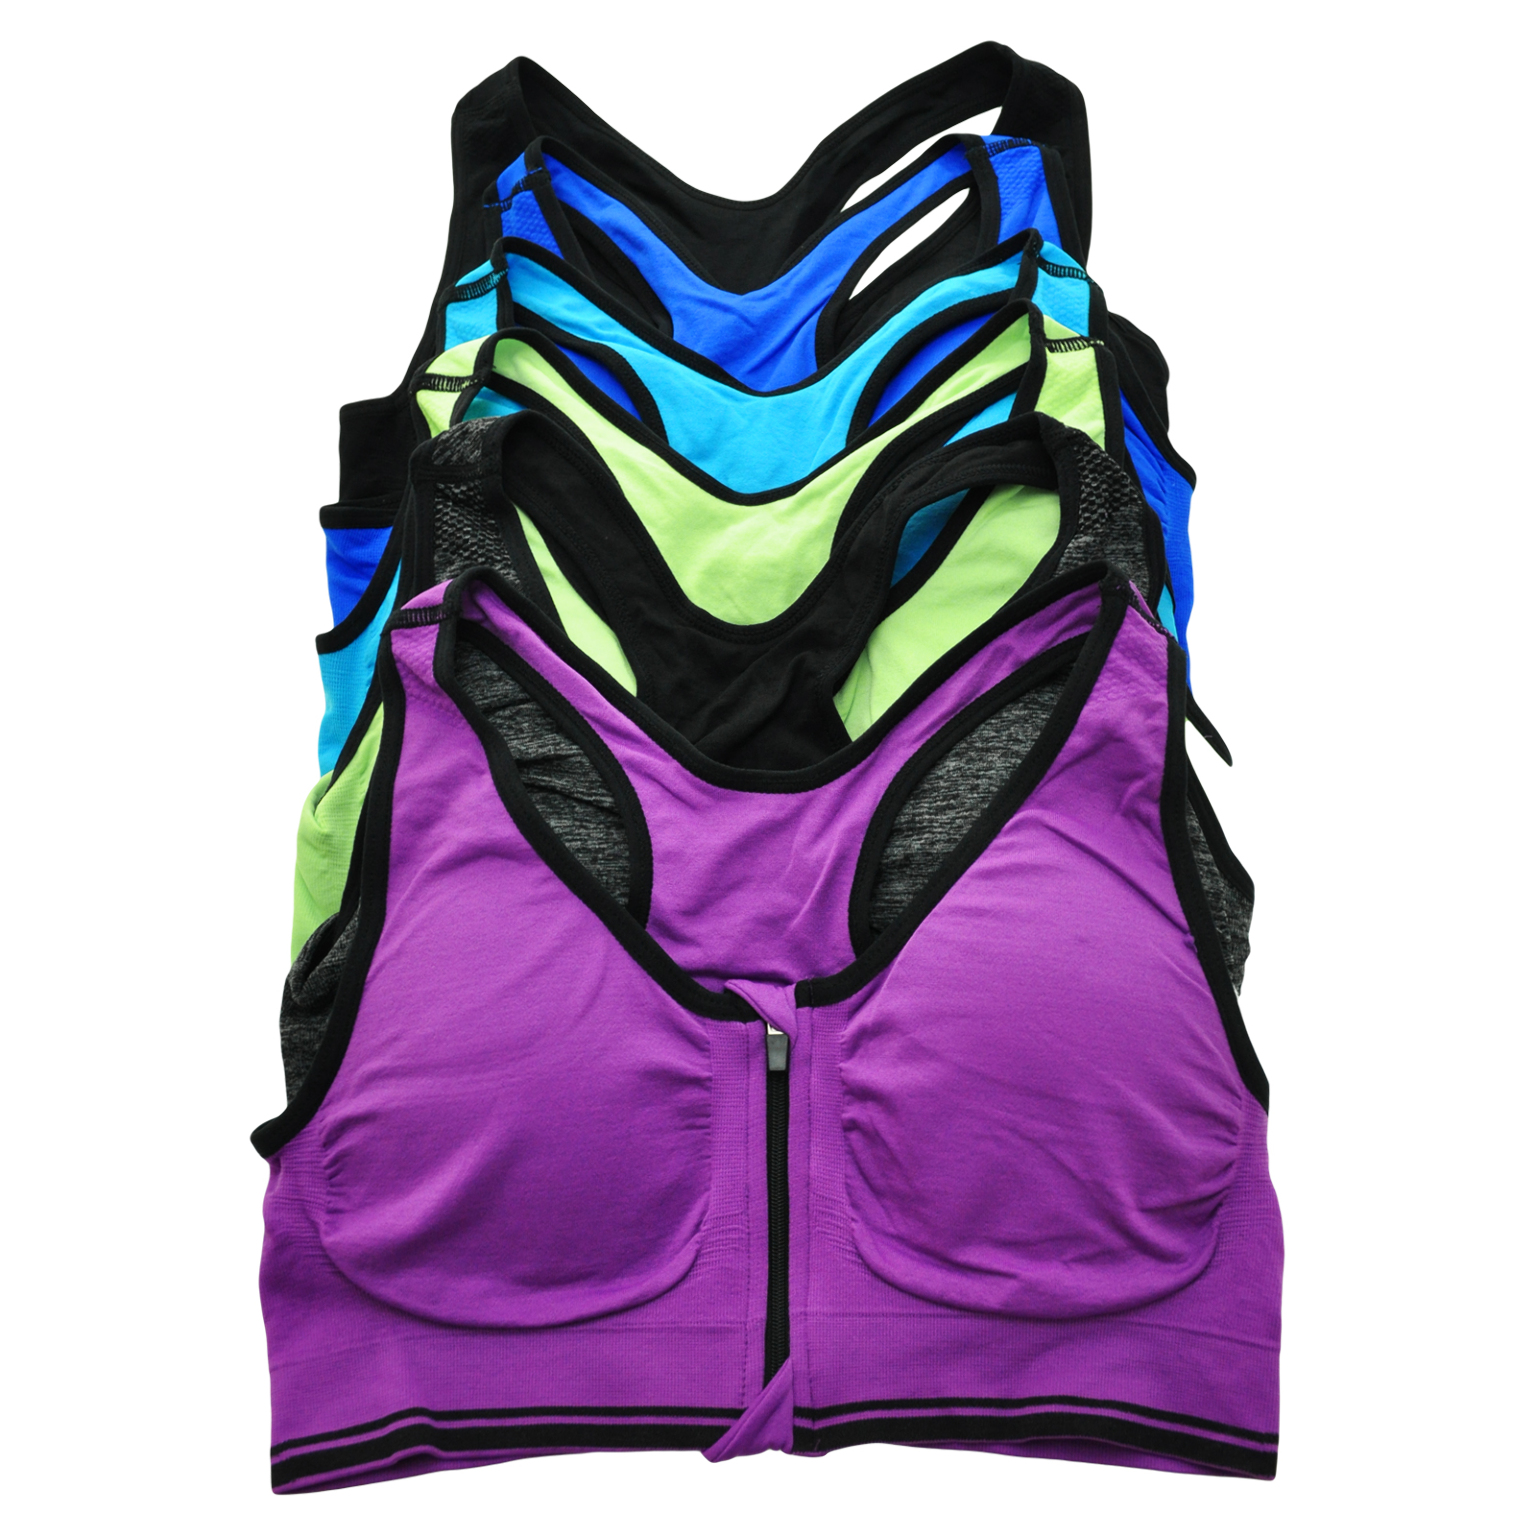 Wholesale Zipper Front Sports Bras in Assorted Colors - DollarDays